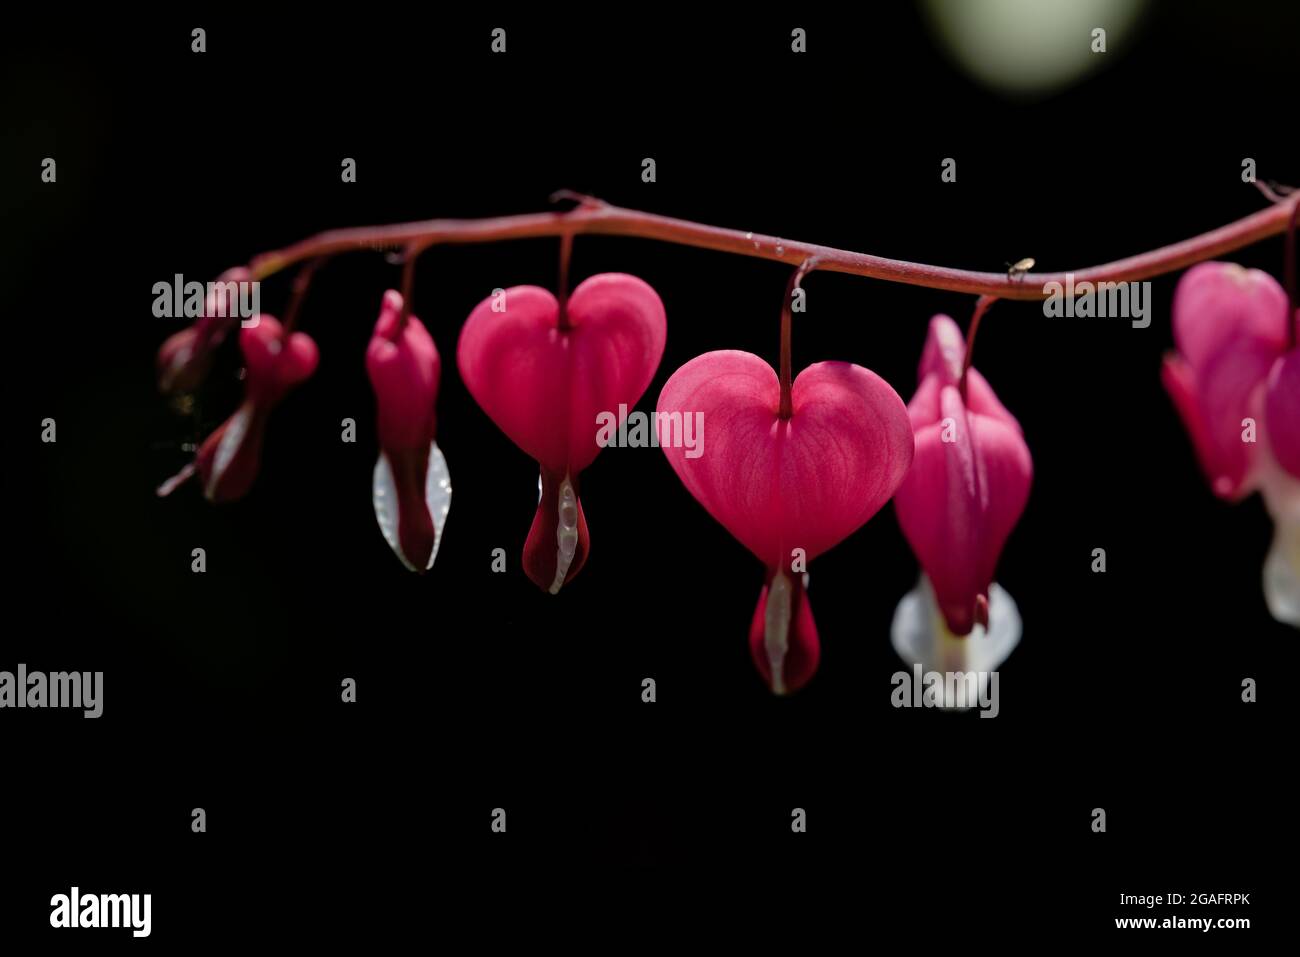 Vibrant pink heart heart shaped flowers, isolated on a black background. Perfect for love or valentines theme, with very detailed macro resolution. Stock Photo